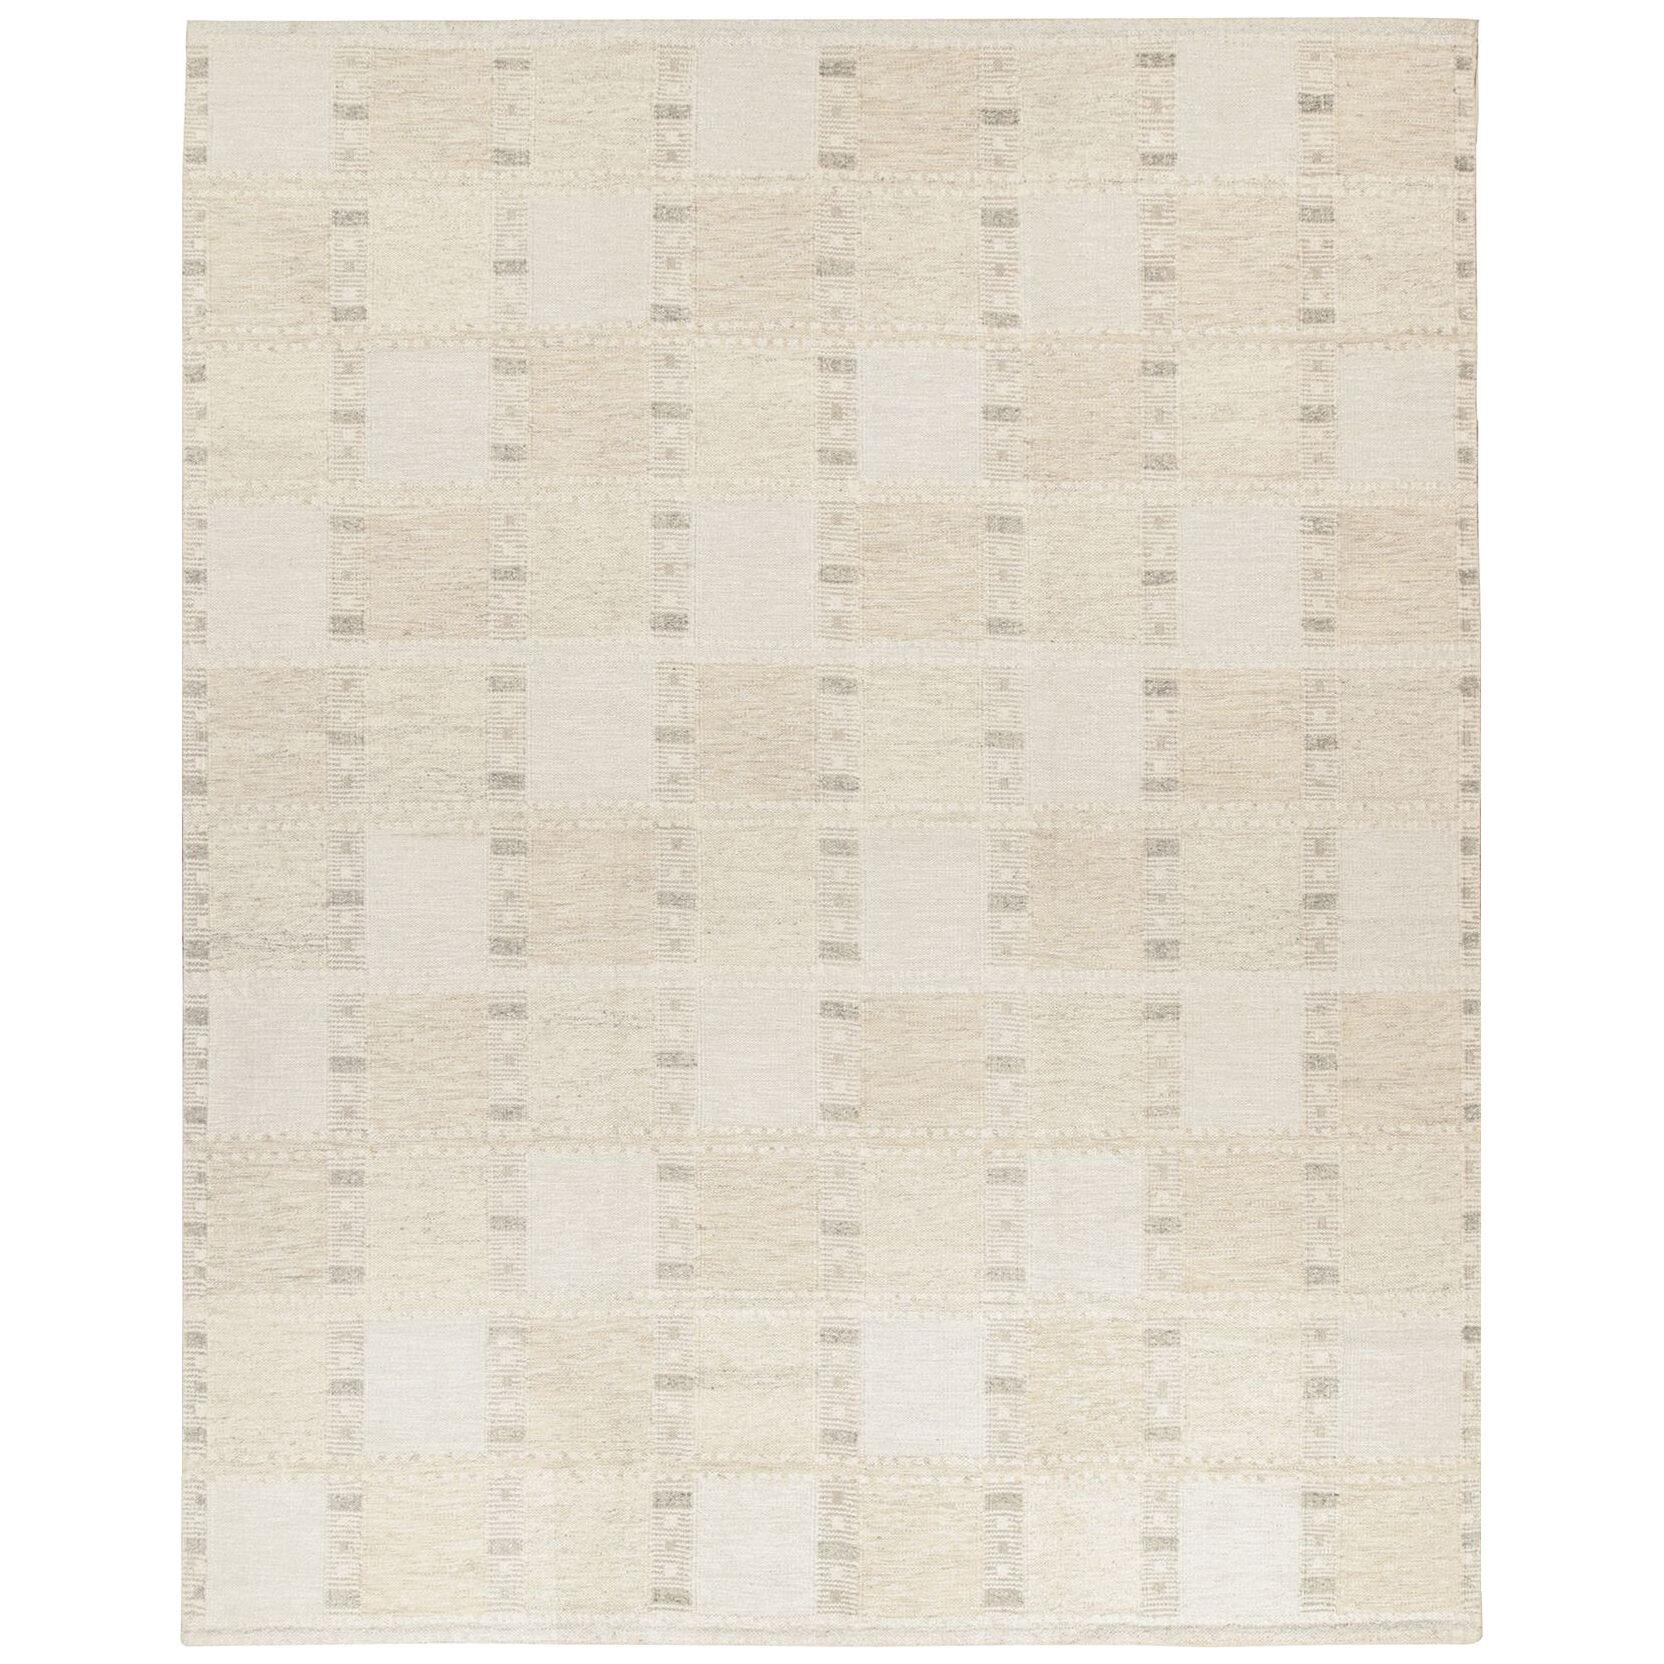 Rug & Kilim’s Scandinavian Style Kilim With Taupe And Beige Geometric Patterns